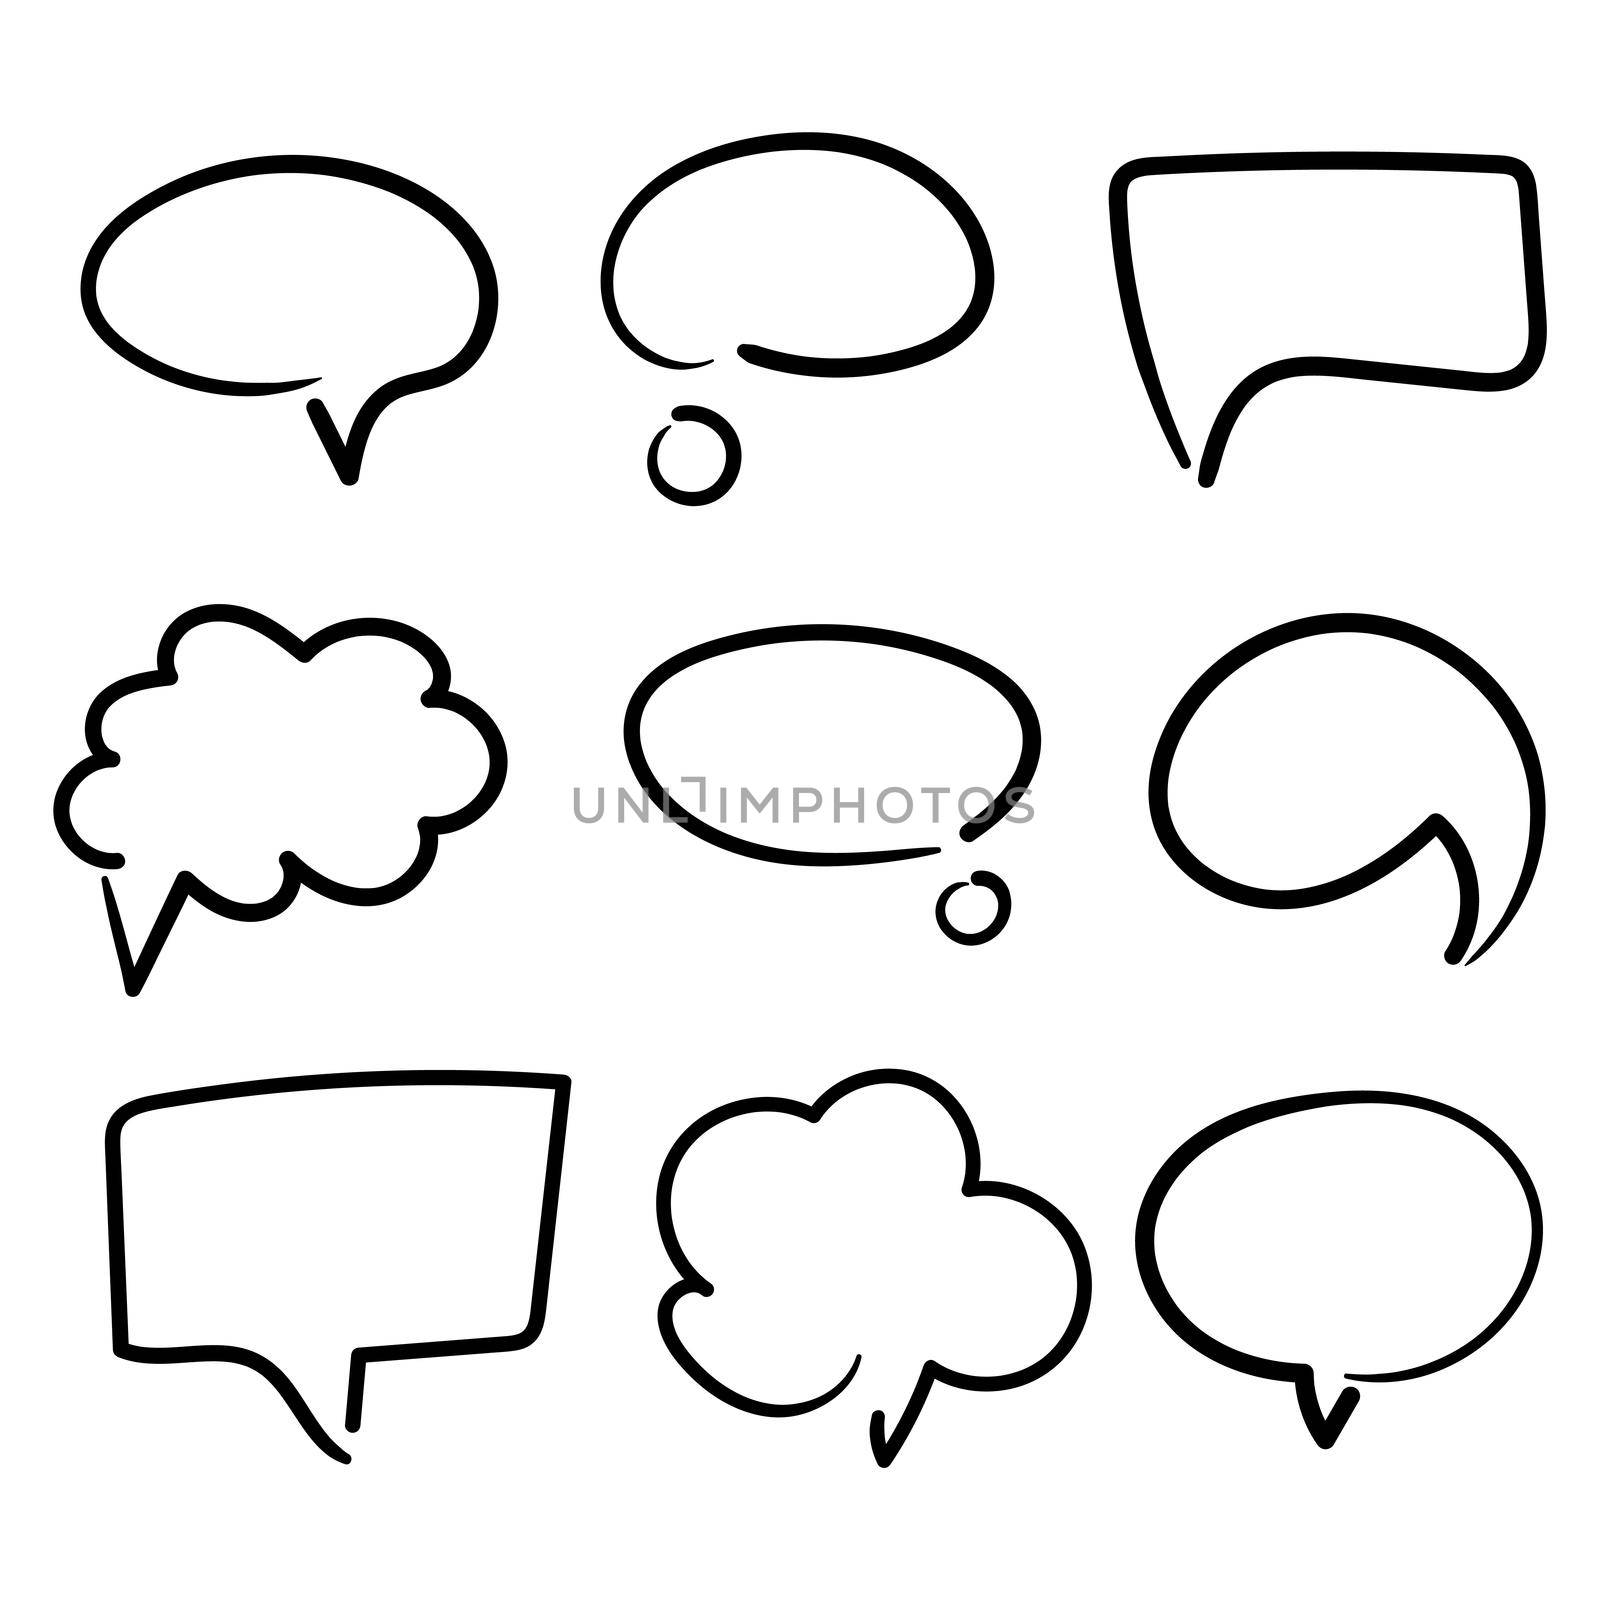 Blank dialog balloon for speech or conversation. Comic style hand drawn vector. Empty bubble illustration for text and message.